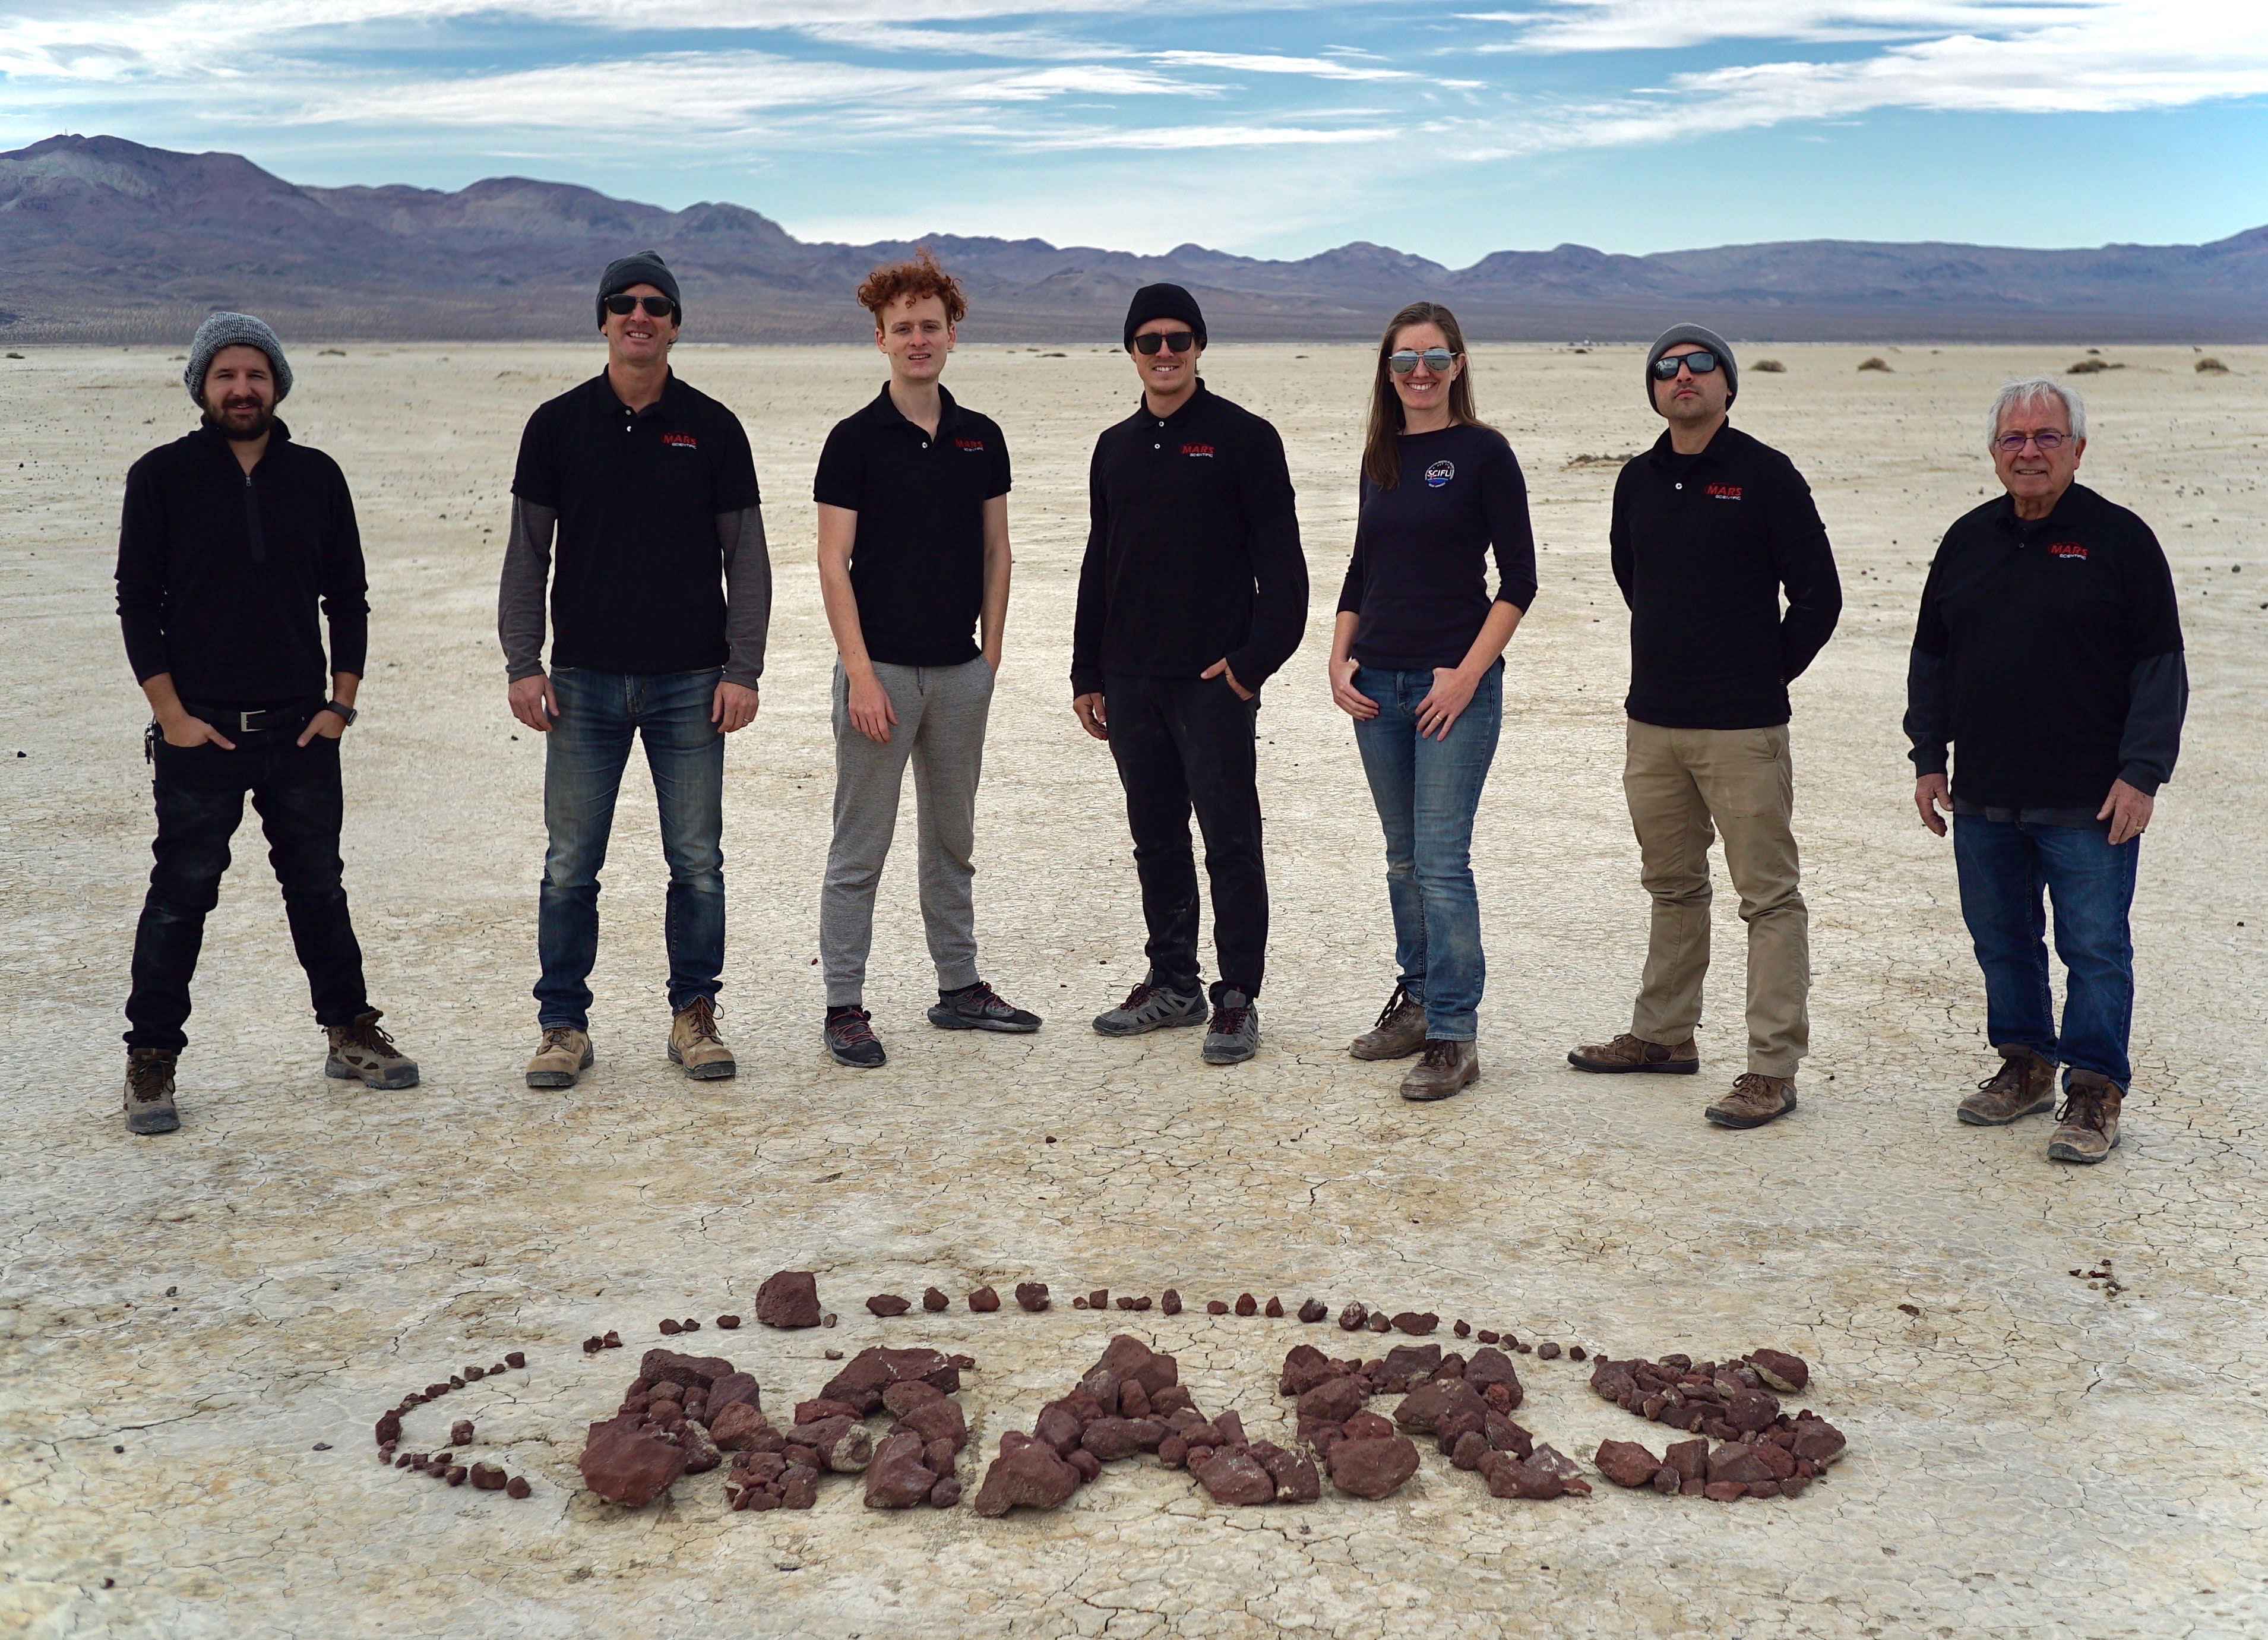 The MARS team and Dr. Jennifer Inman (project manager for SCIFLI) stand in a desert landscape. The MARS logo is made with rocks on the ground in front of them.